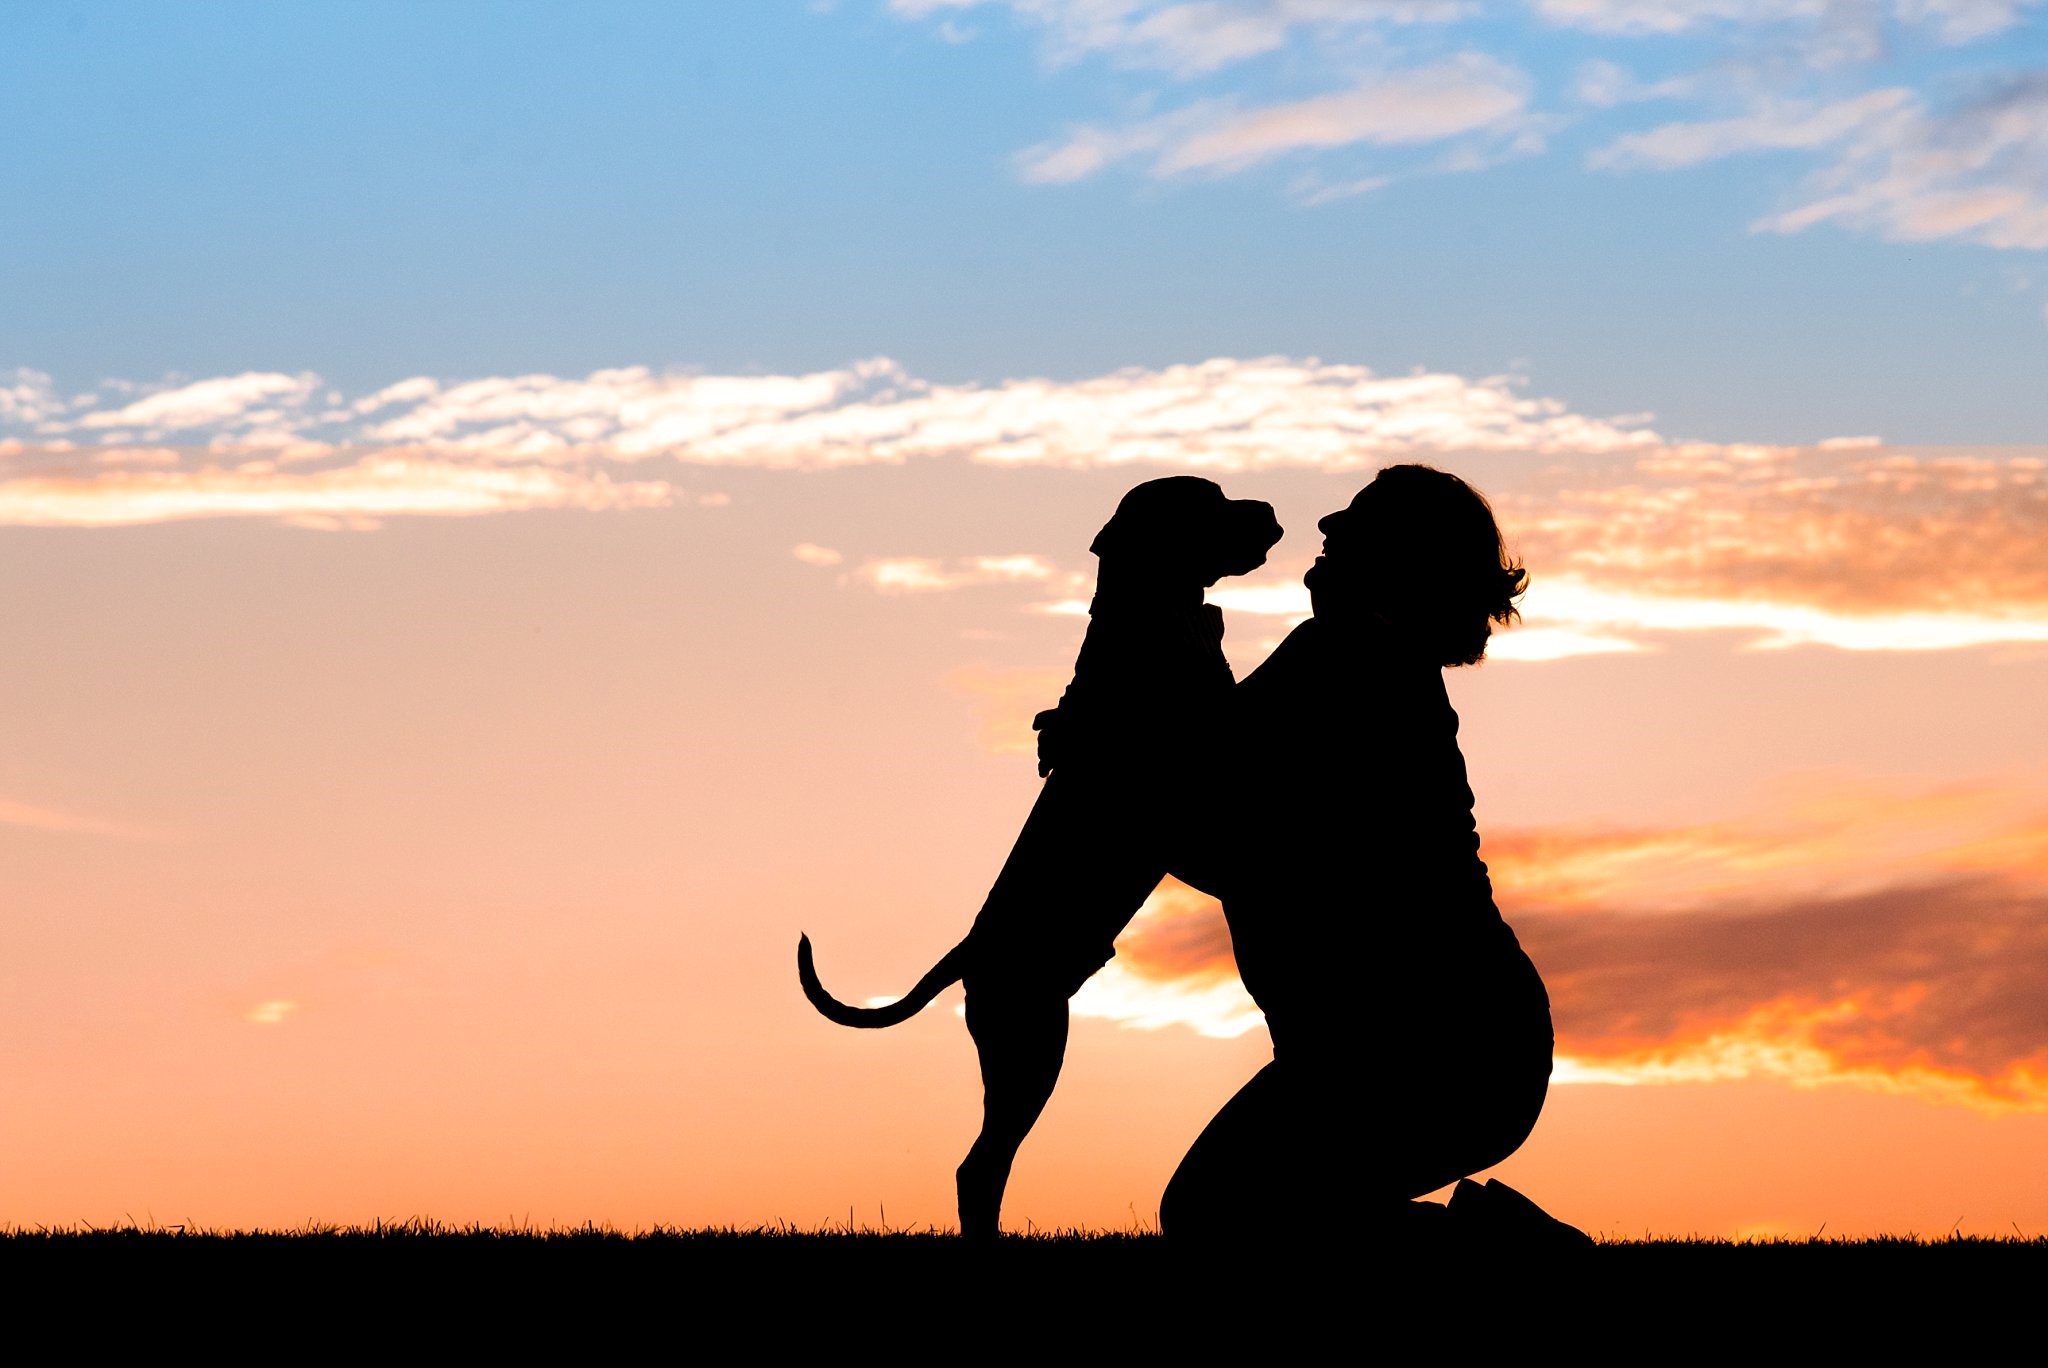 woman embracing dog against a silhouette sky